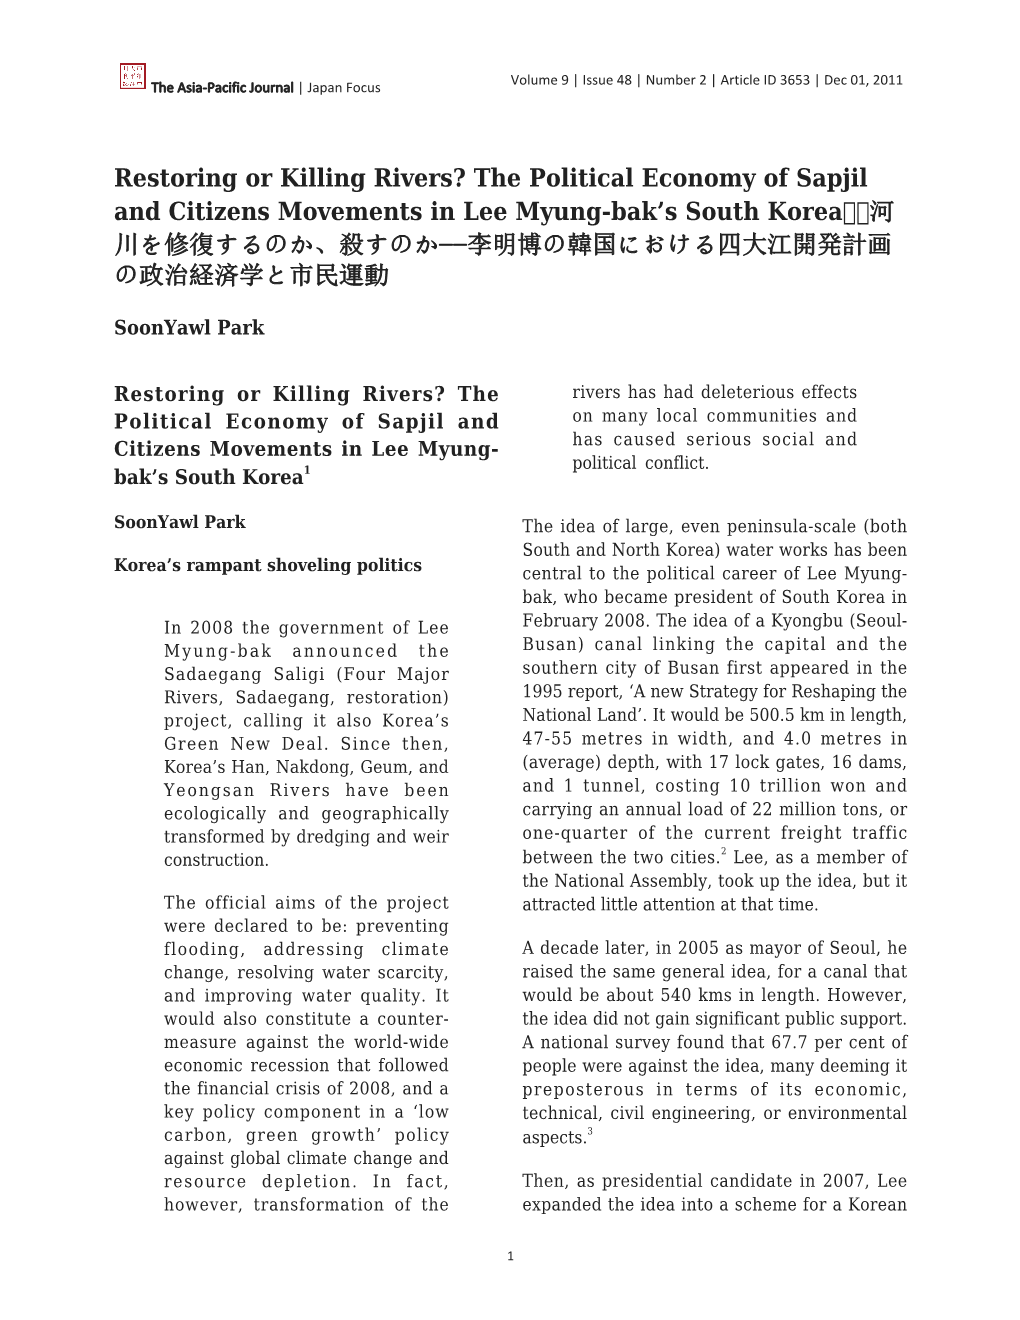 Restoring Or Killing Rivers? the Political Economy of Sapjil and Citizens Movements in Lee Myung-Bak's South Korea 河